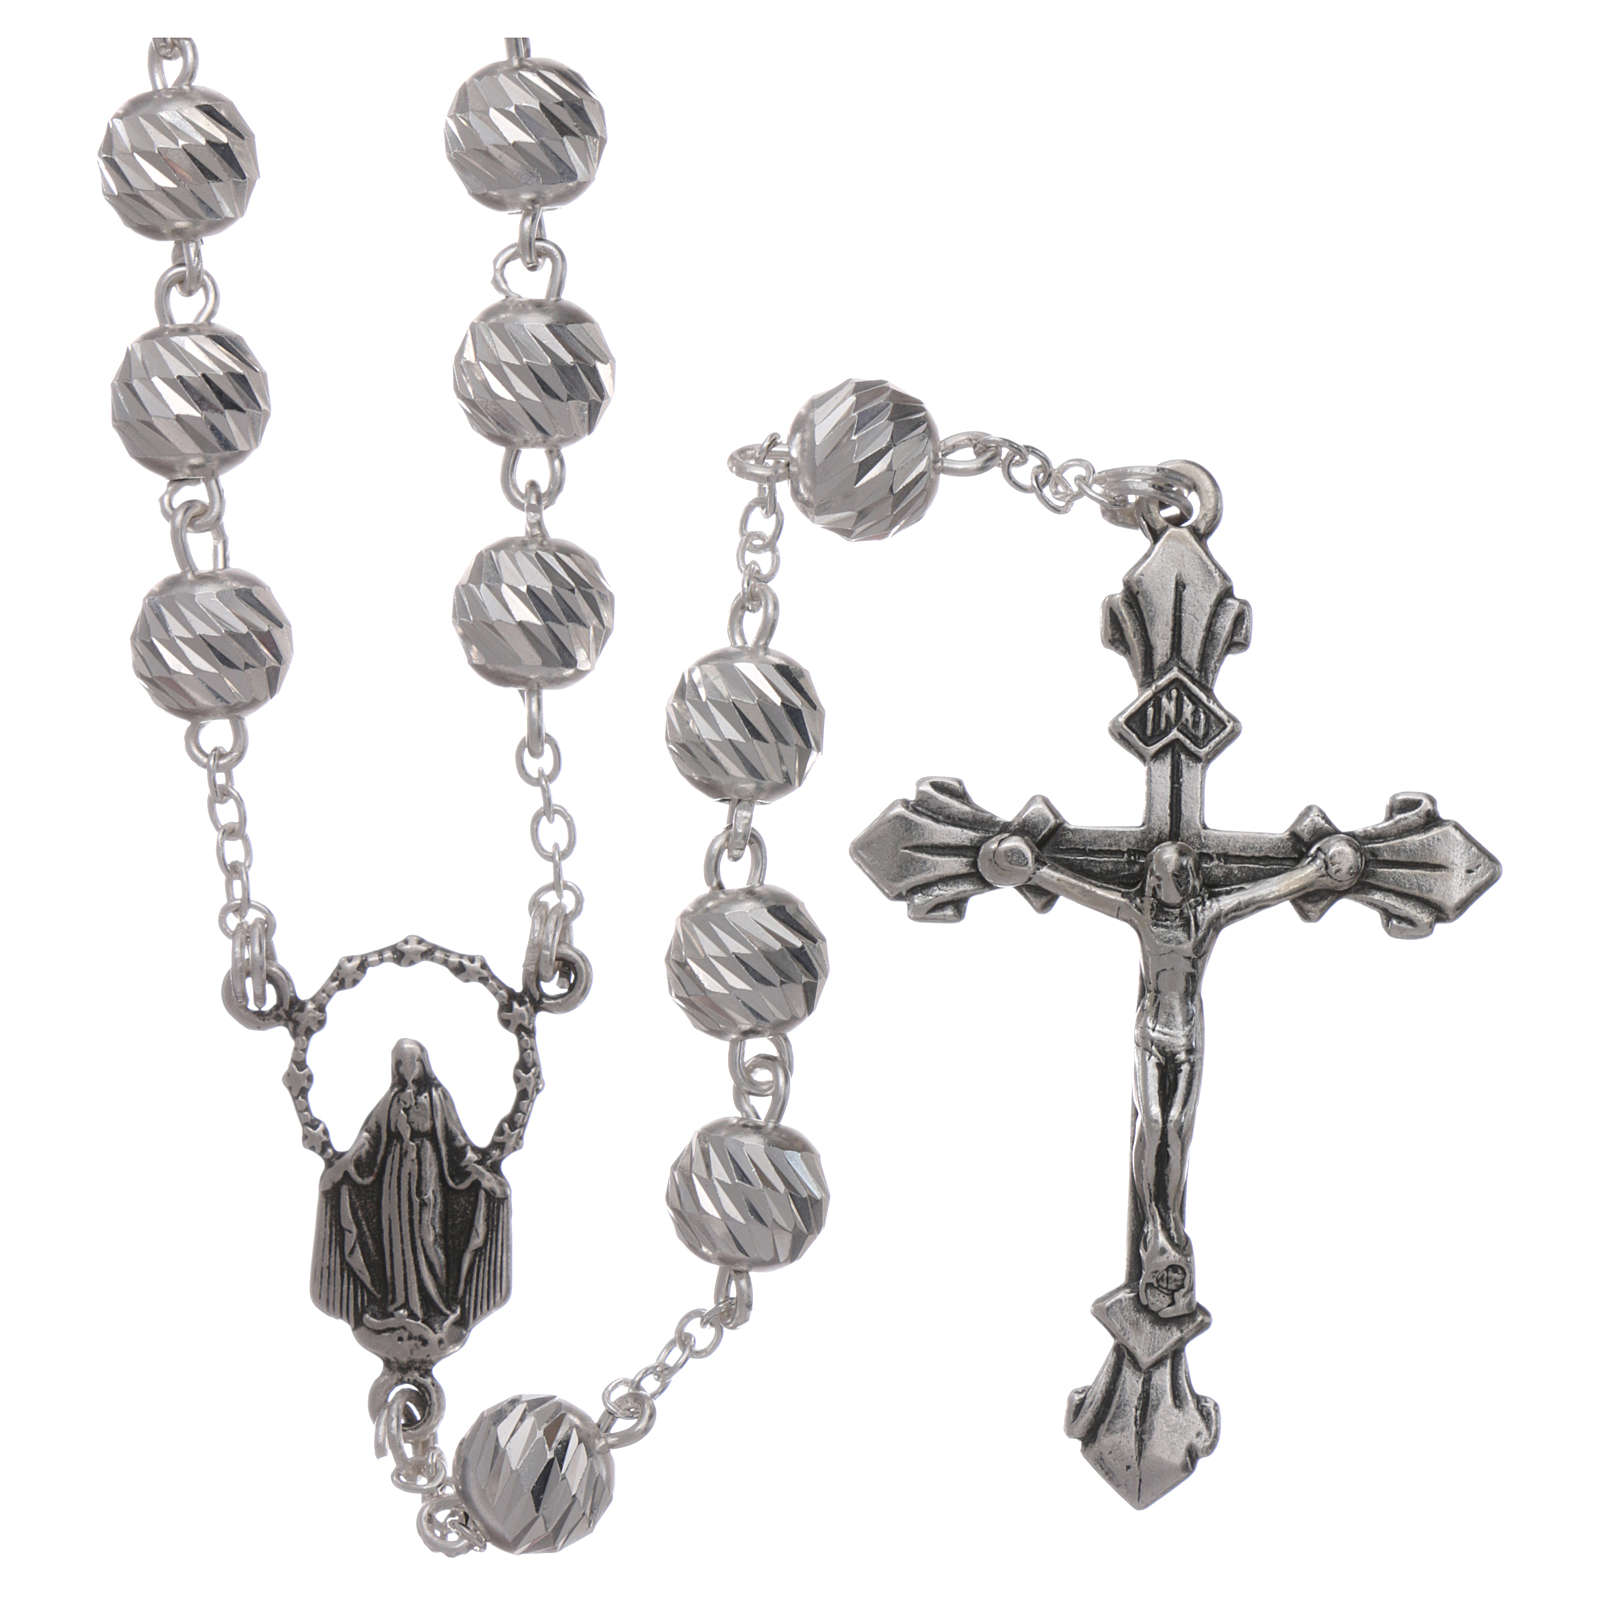 Silver Plate Rosary Bracelet features 6mm Zircon Fire Polished beads The Crucifix measures 5/8 x 1/4 Patron Saint Bachelors/Poland The charm features a St Casimir of Poland medal 